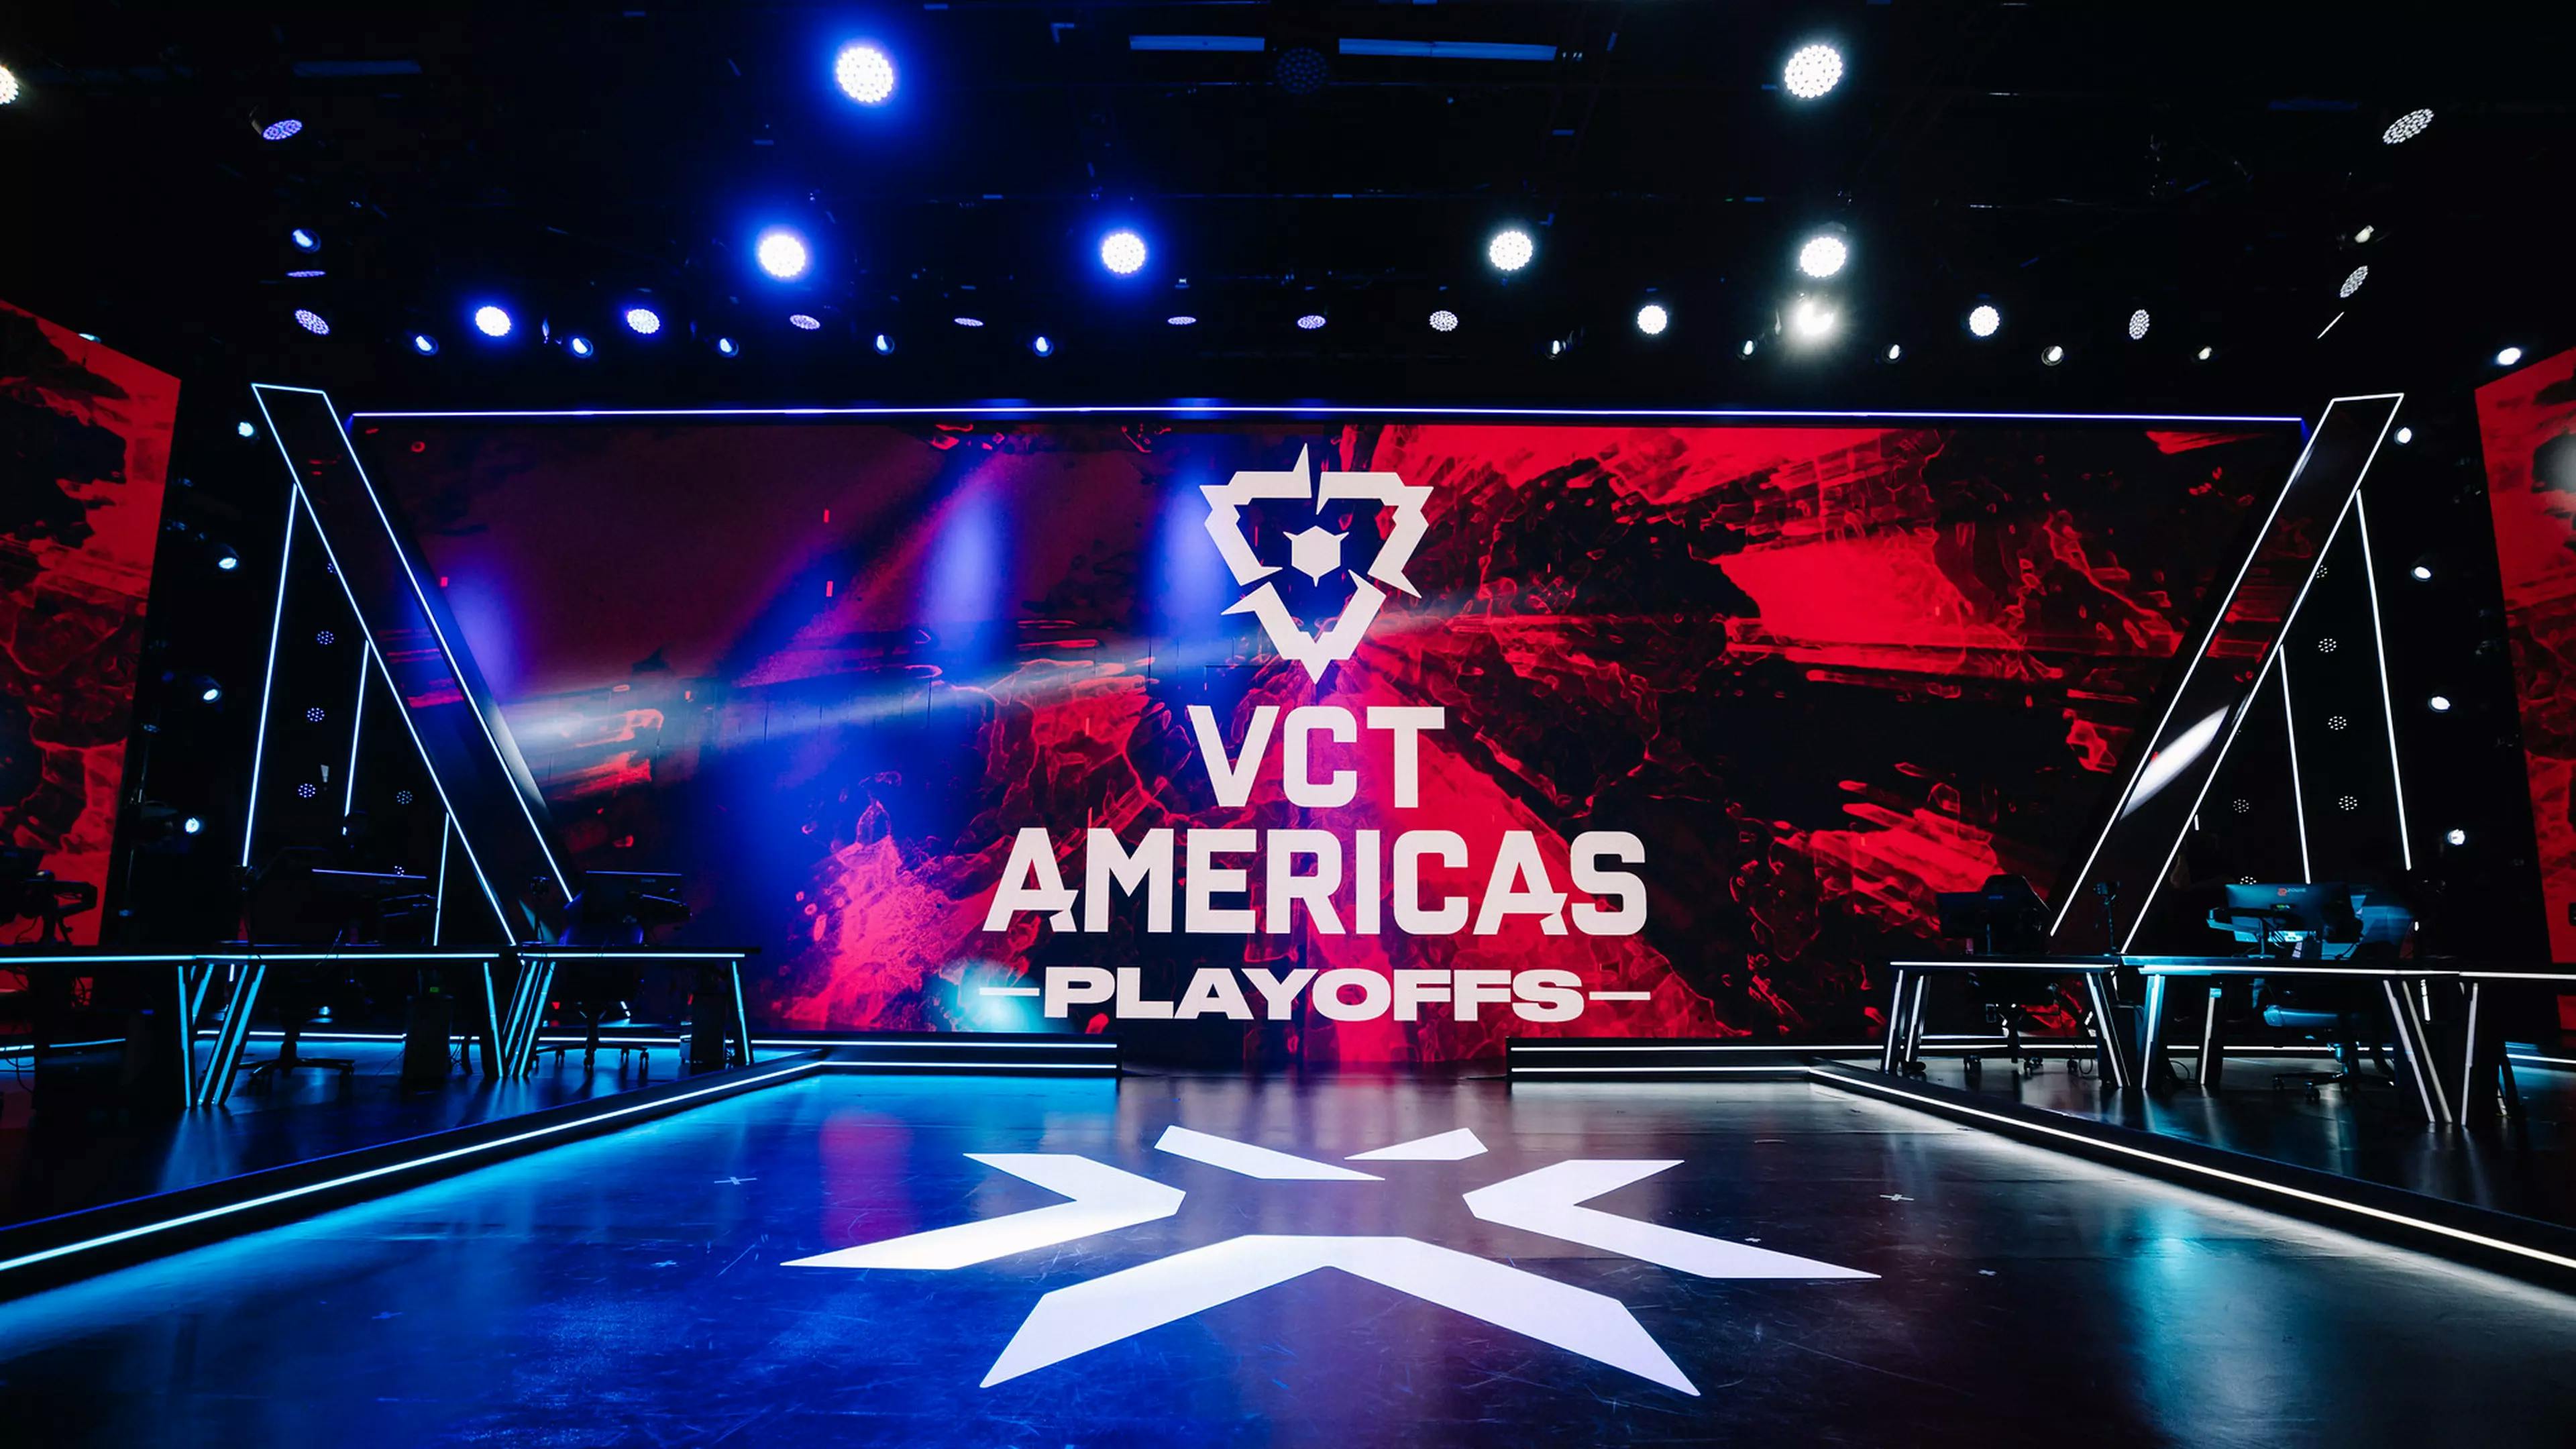 The Riot Games Arena in LA hosts the VCT Americas league. 